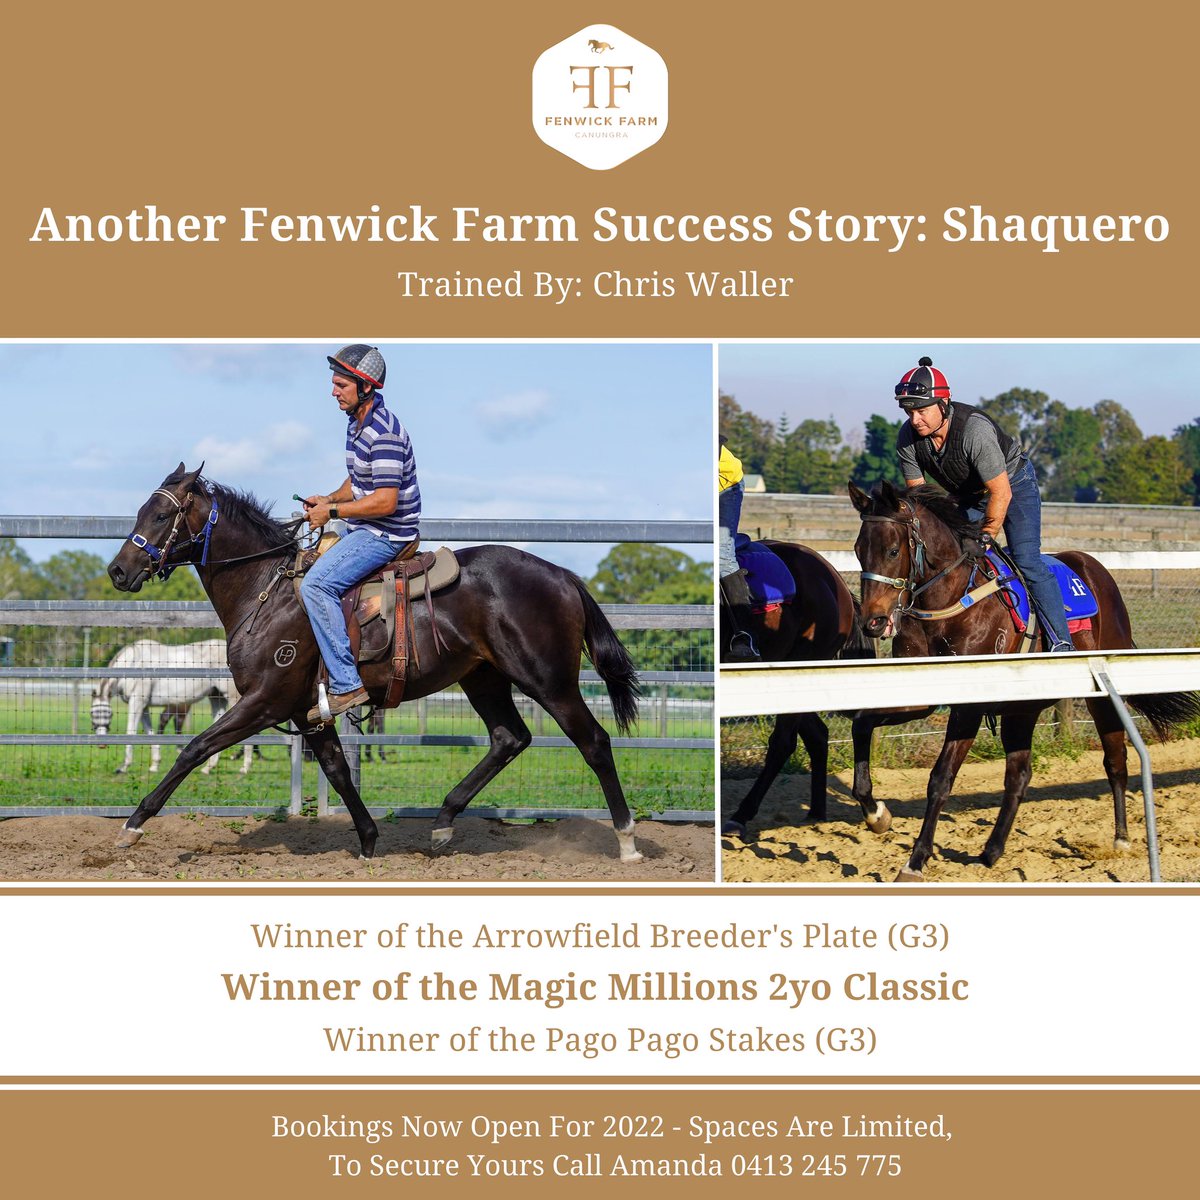 $160,000 @mmsnippets purchase has now earned $1,443,075 in prize money. Fenwick Farm are the proud early educators of Shaquero! Could your yearling purchase follow in his footsteps? - To read more about Shaquero’s story head over to our Instagram or Facebook. @cwallerracing